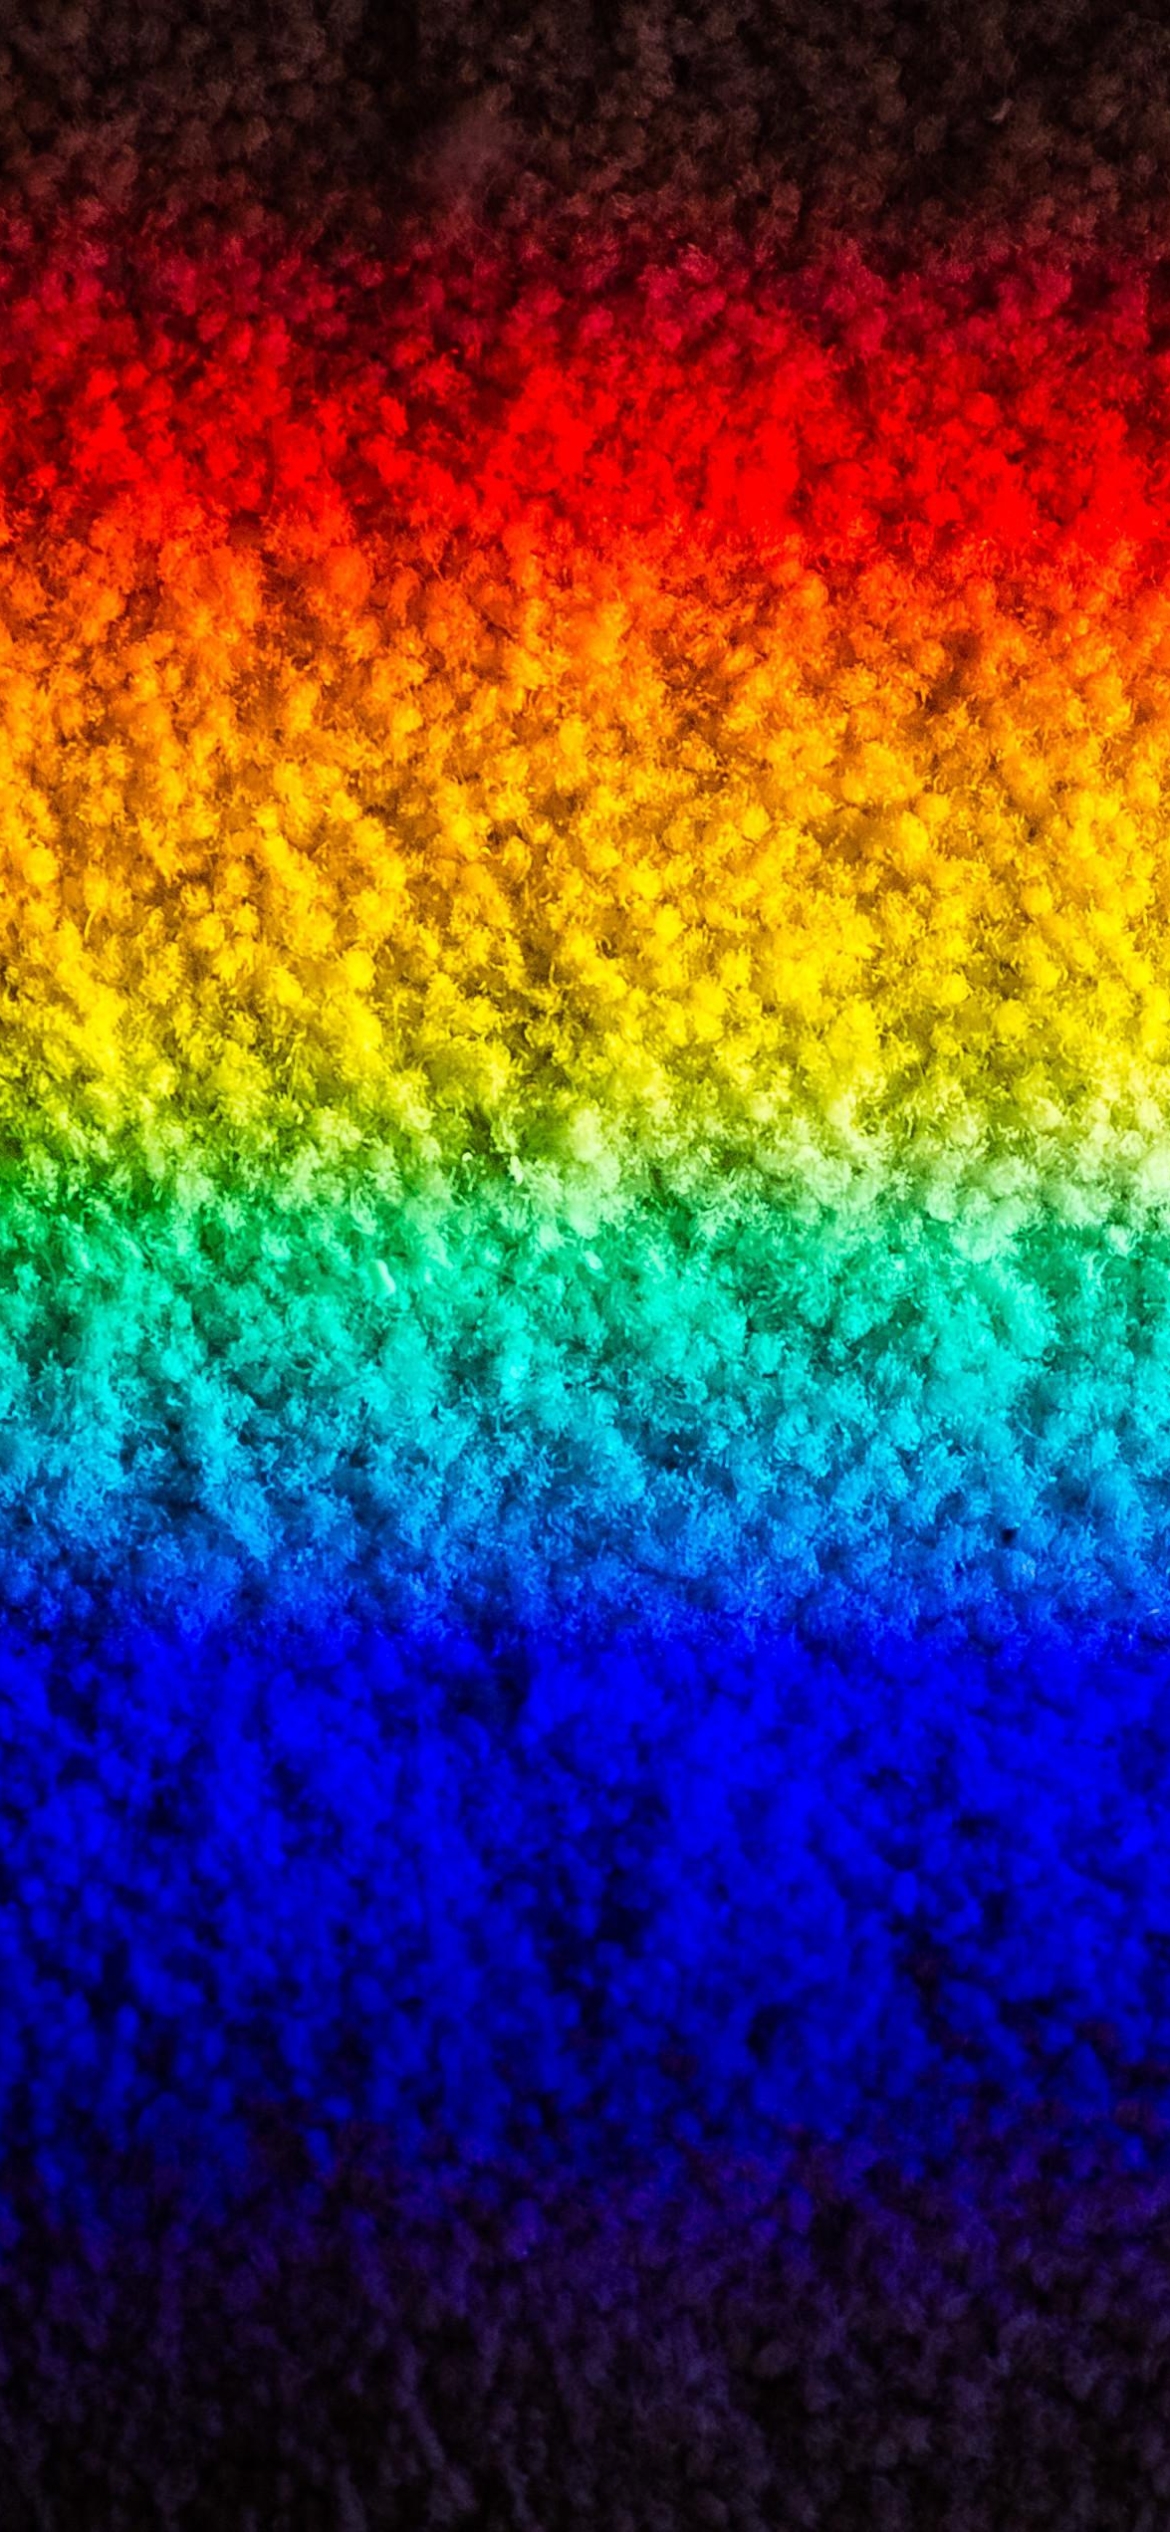 Download Rainbow Mobile Wallpaper With Little Love For Free Background  Wallpaper Image For Free Download  Pngtree